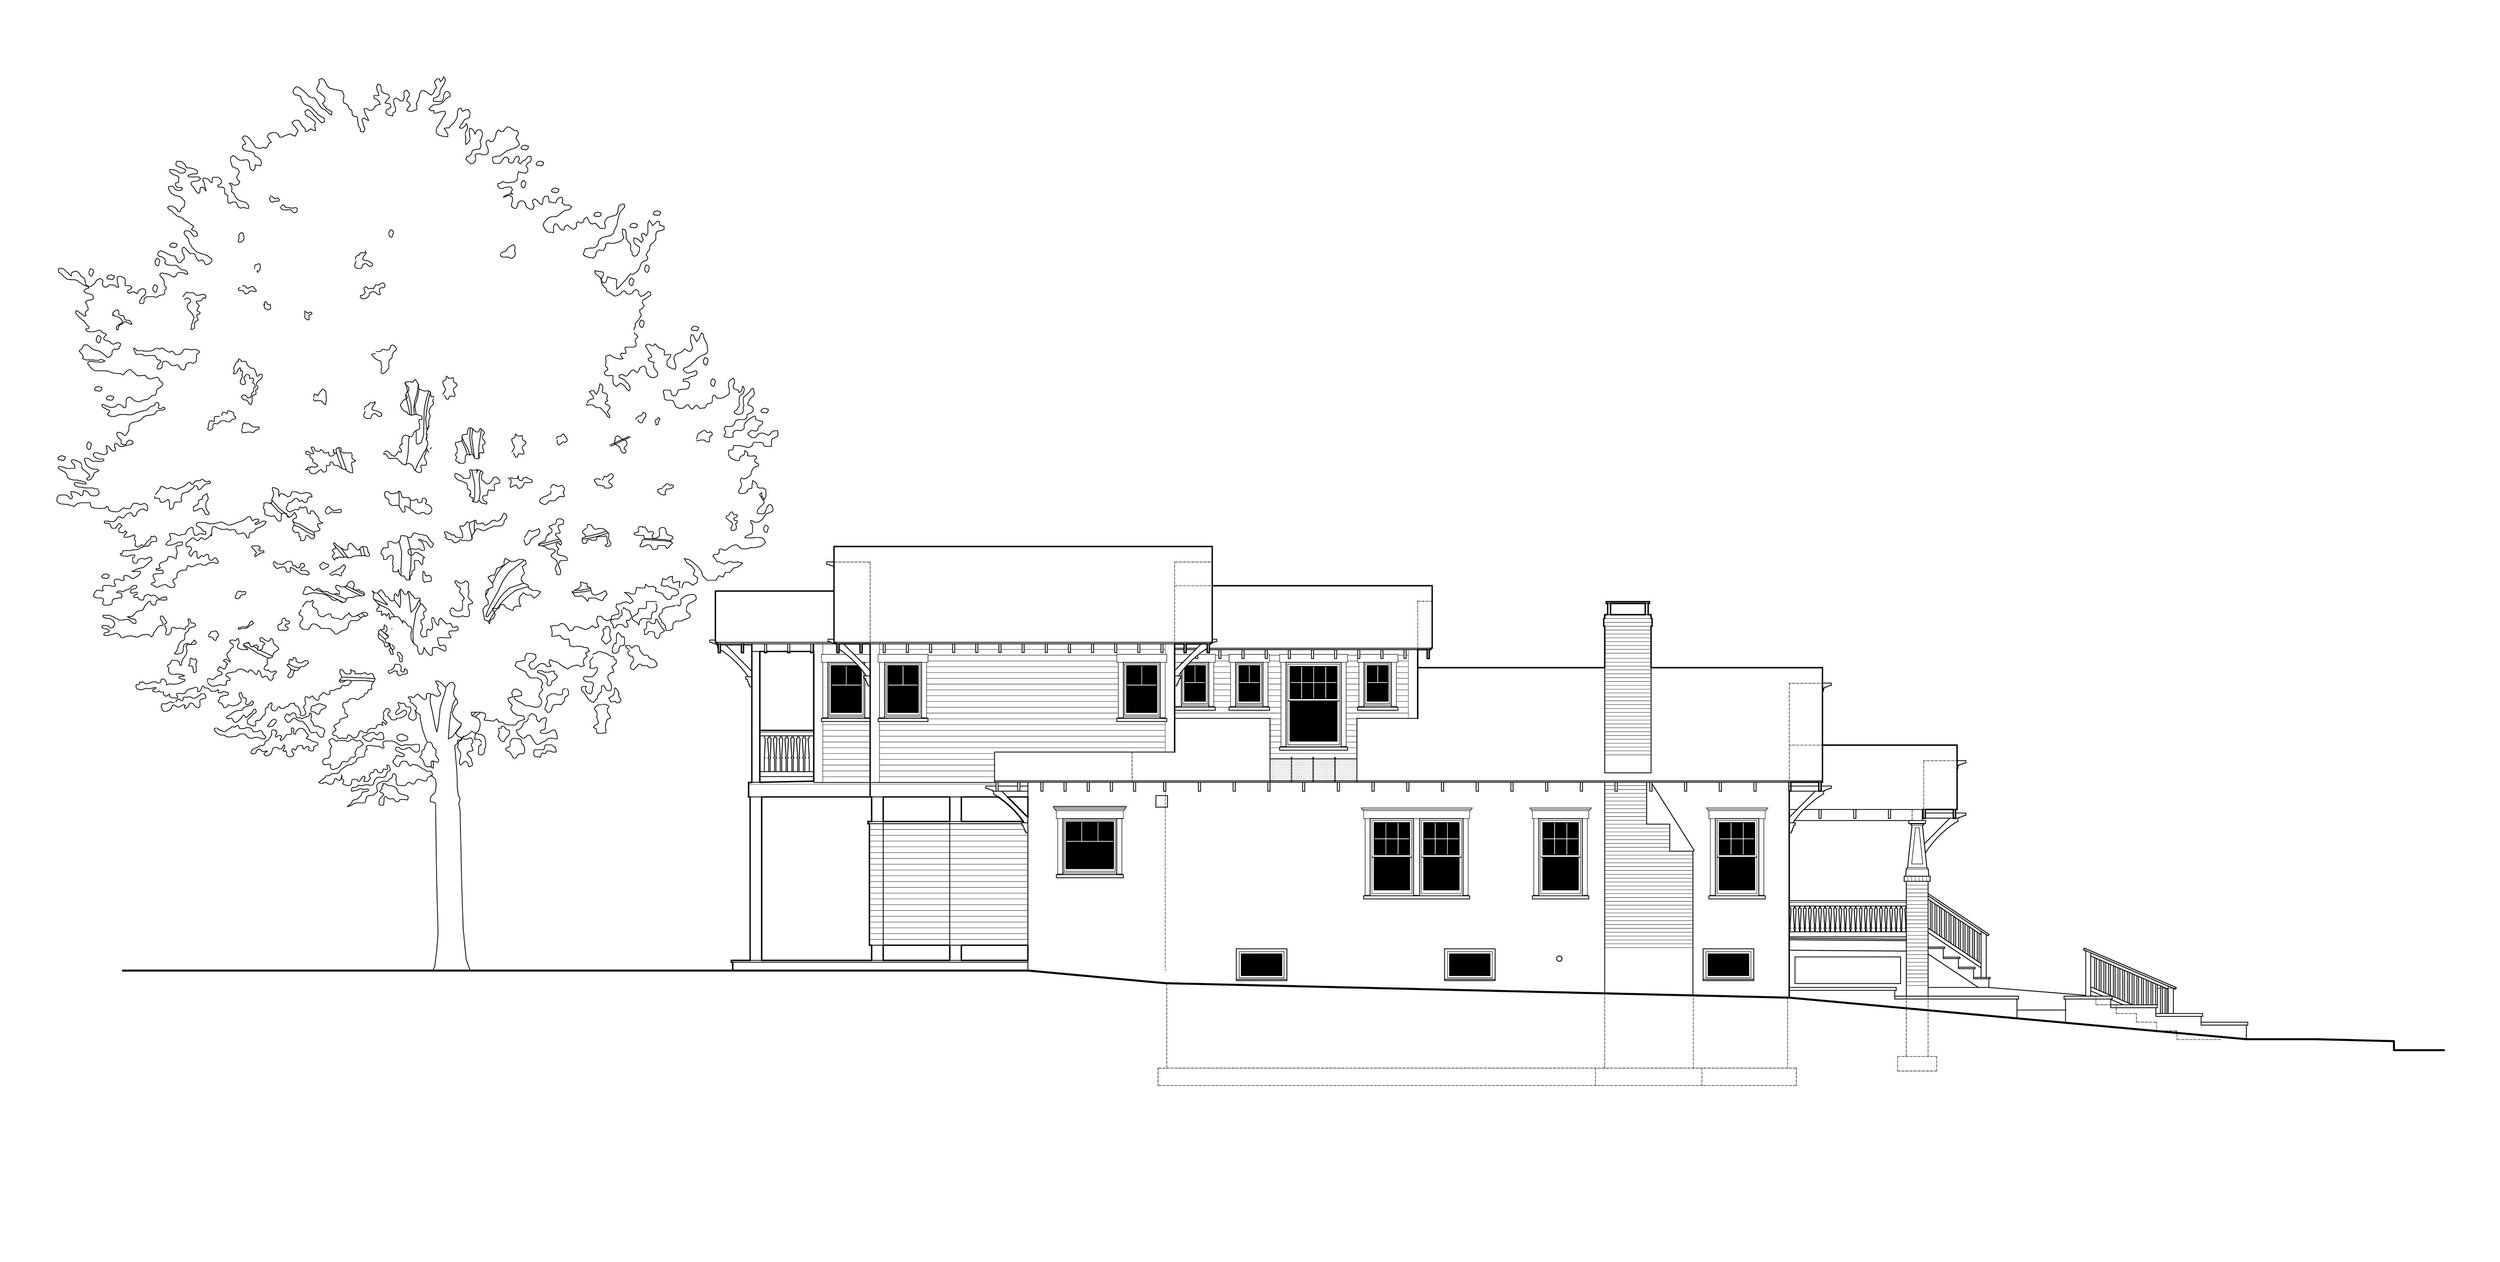  Proposed East Elevation 